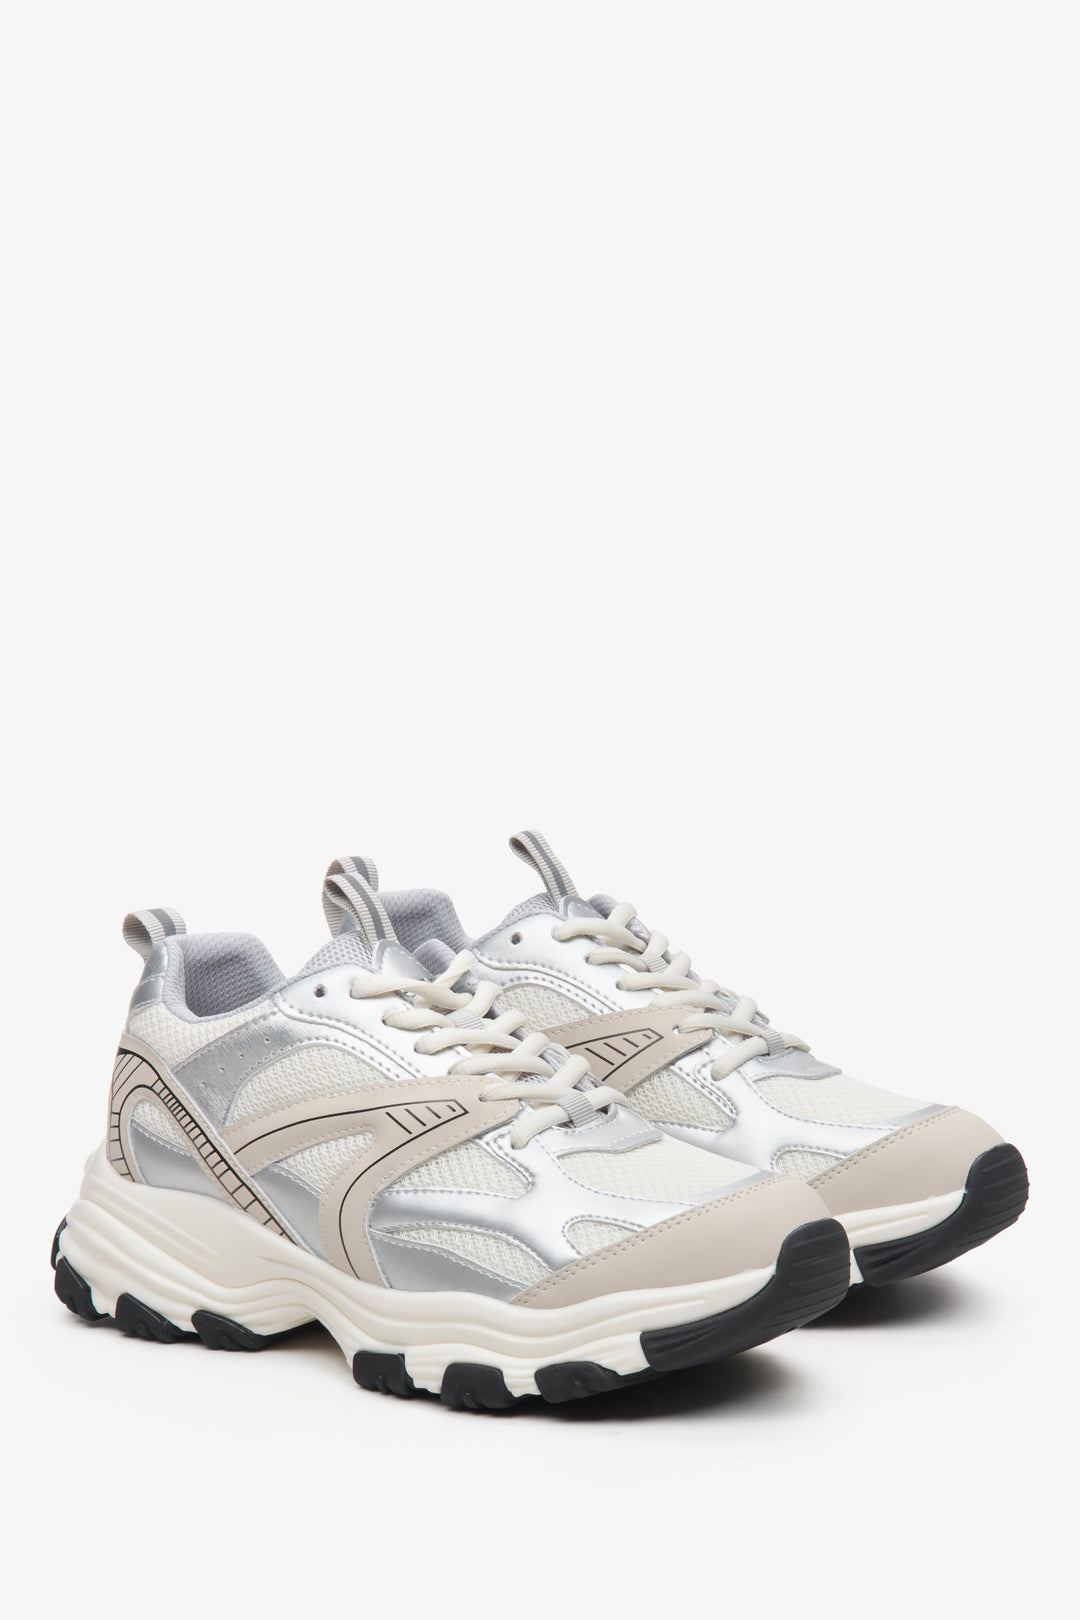 ES8 women's sporty light beige sneakers with silver accents.